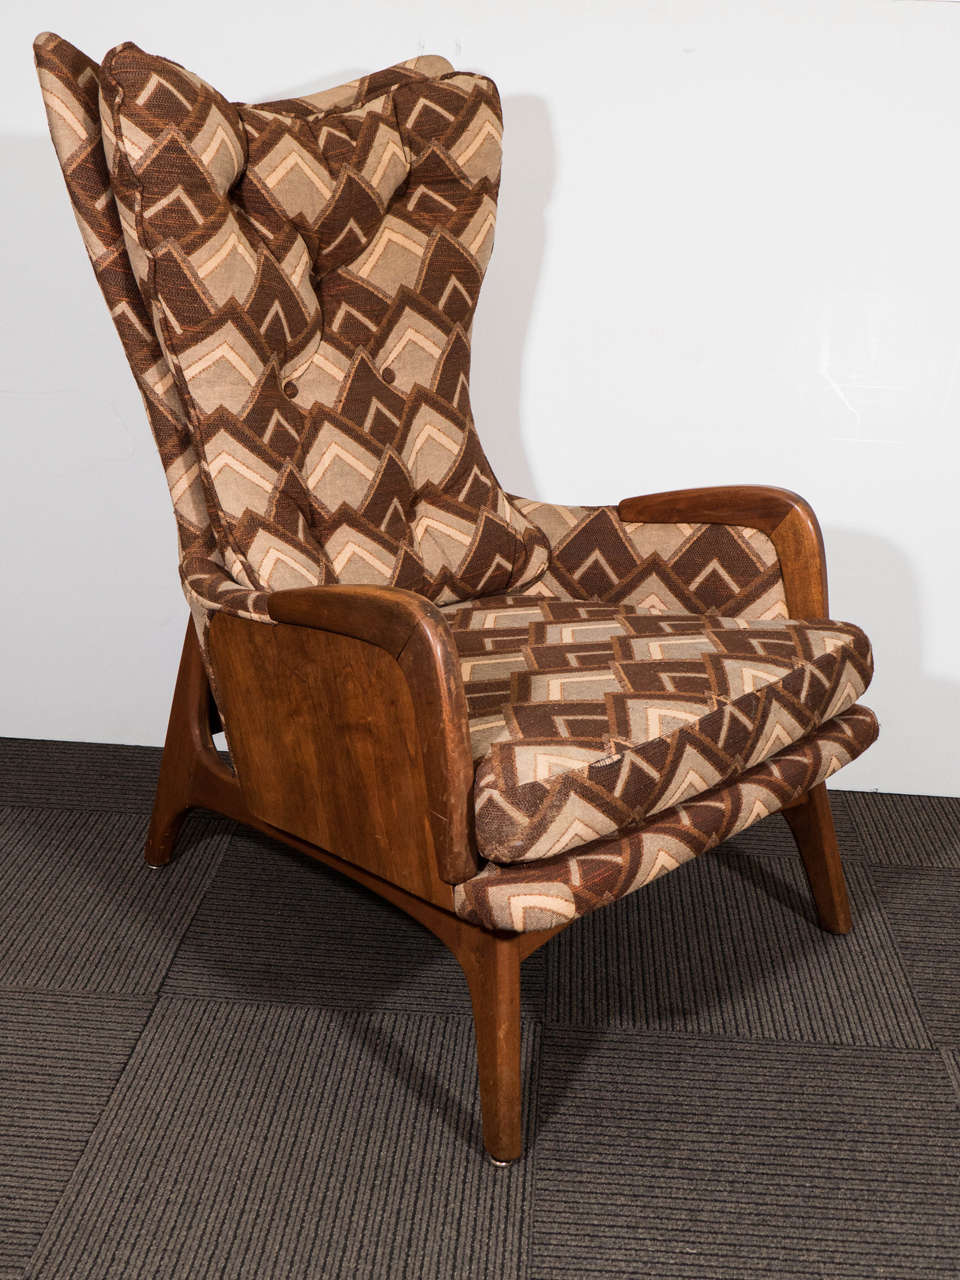 A vintage Adrian Pearsall wingback lounge chair, with button tufted geometric pattern upholstery in varying shades of brown. Good vintage condition with age appropriate wear.